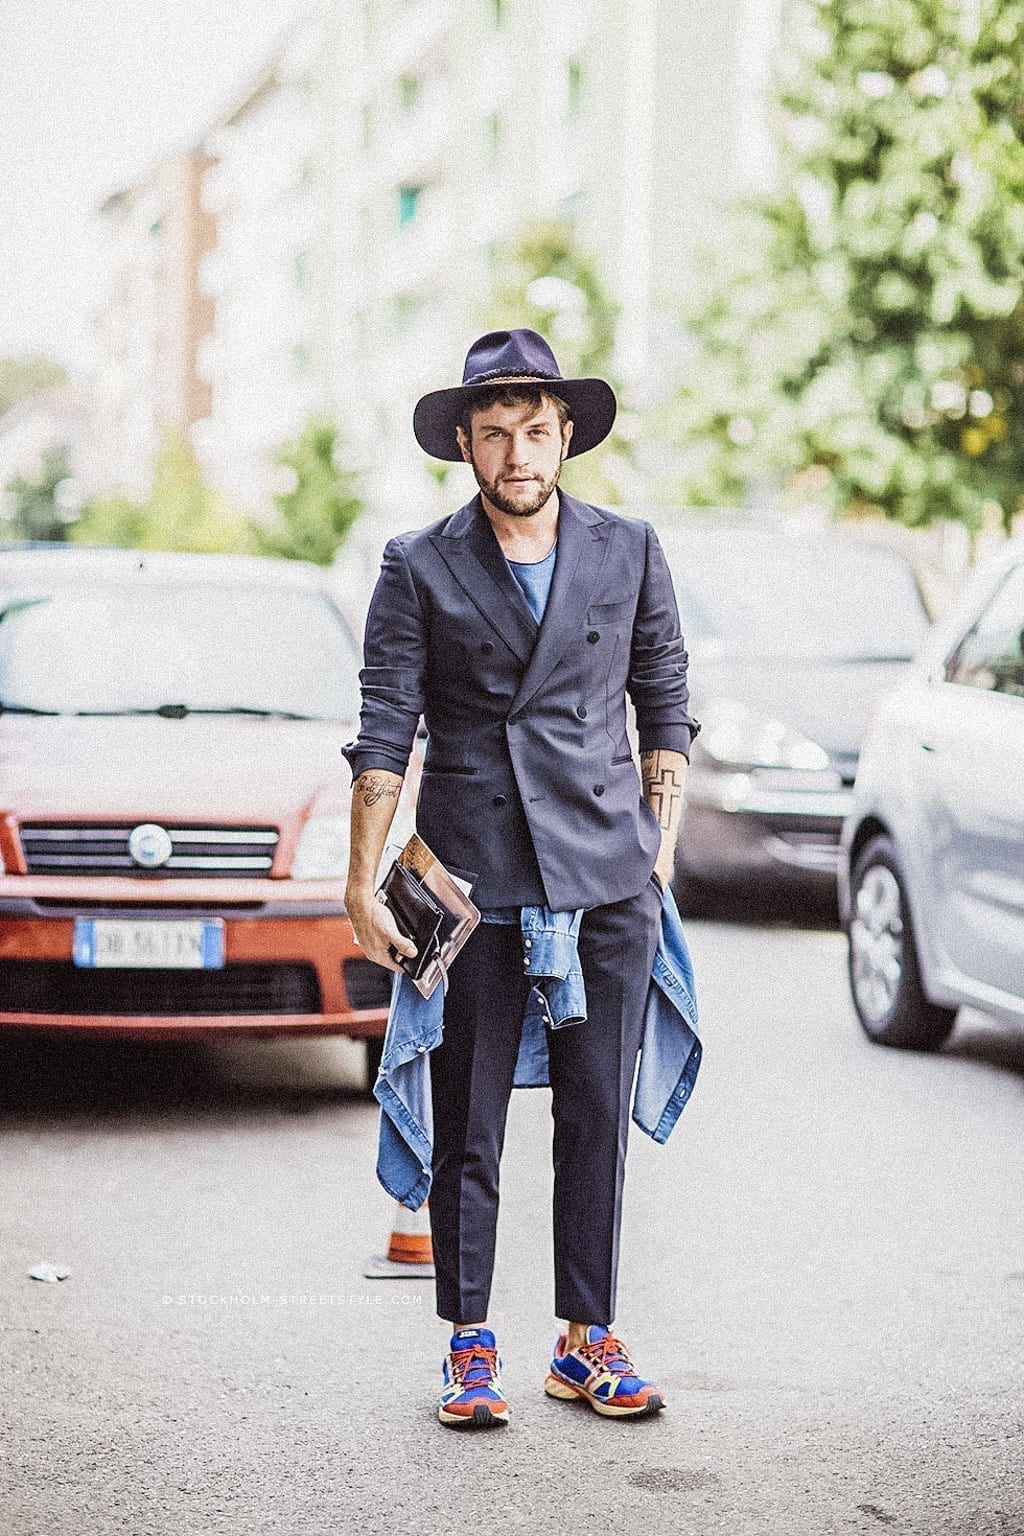 CK1607_Constantly-K-stockholm-streetstyle--10